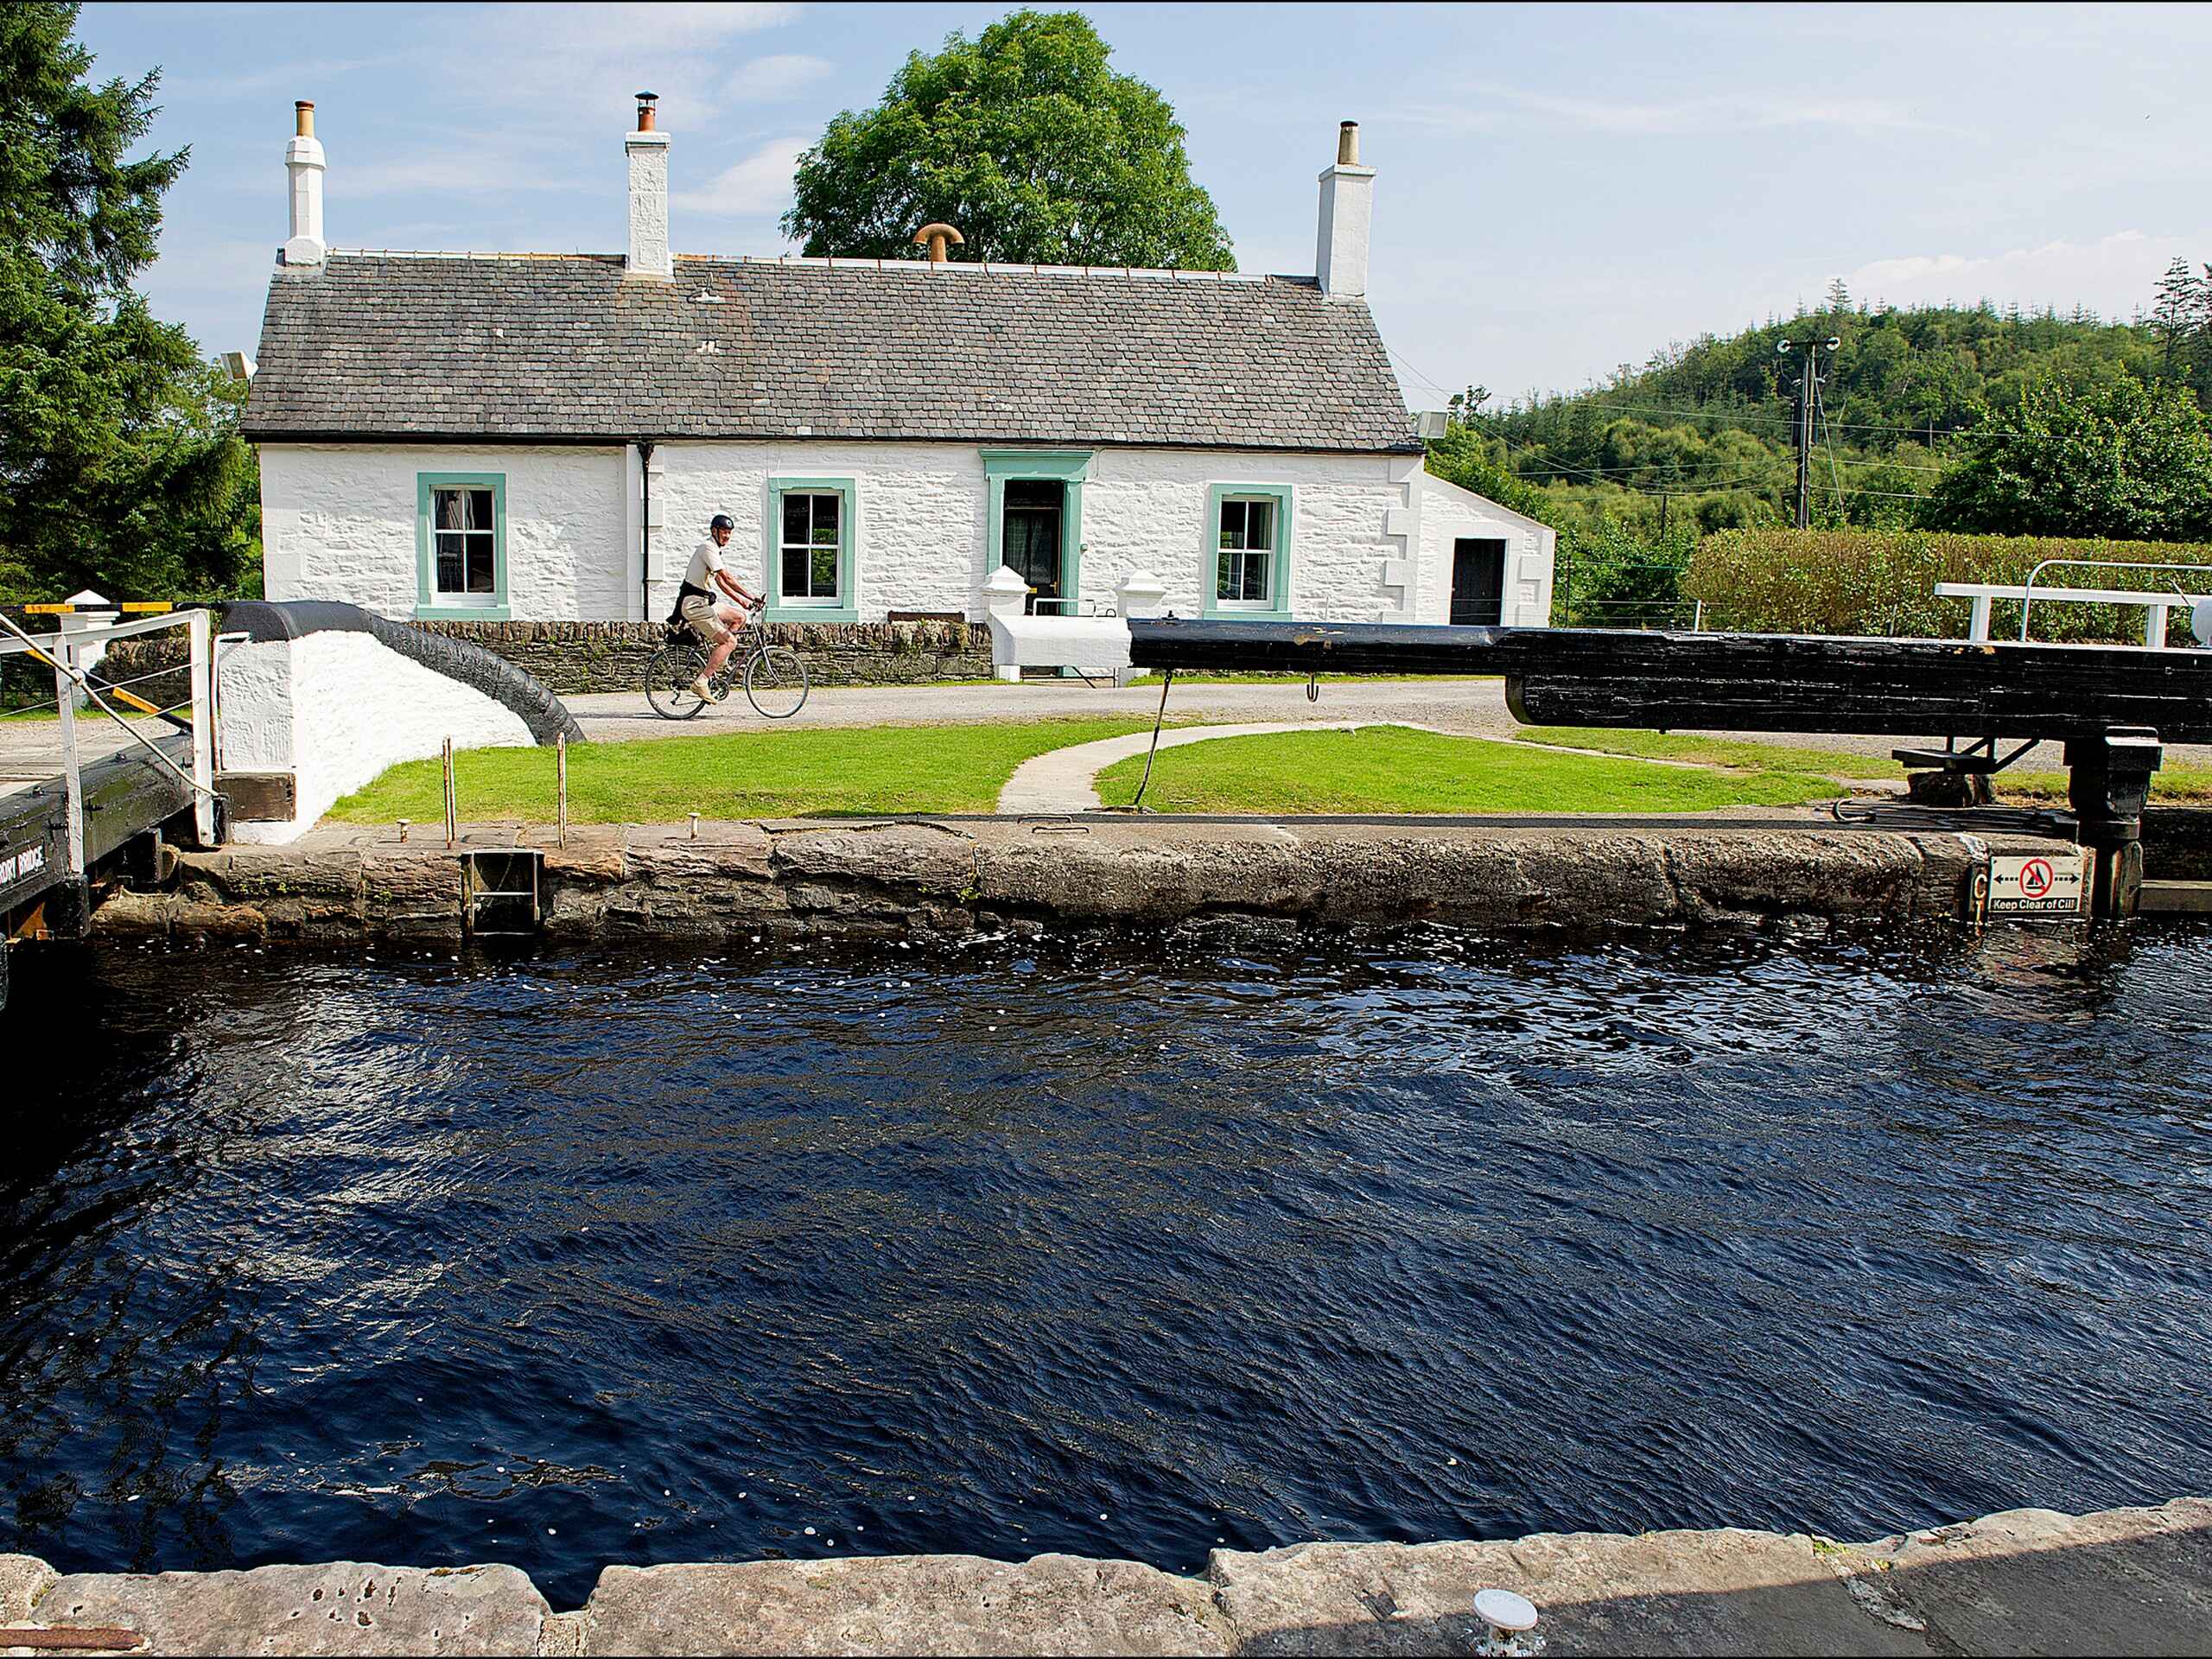 Cyclist passing Bannatyne Canalside Cottage on the Crinan Canal c Peter Sandground